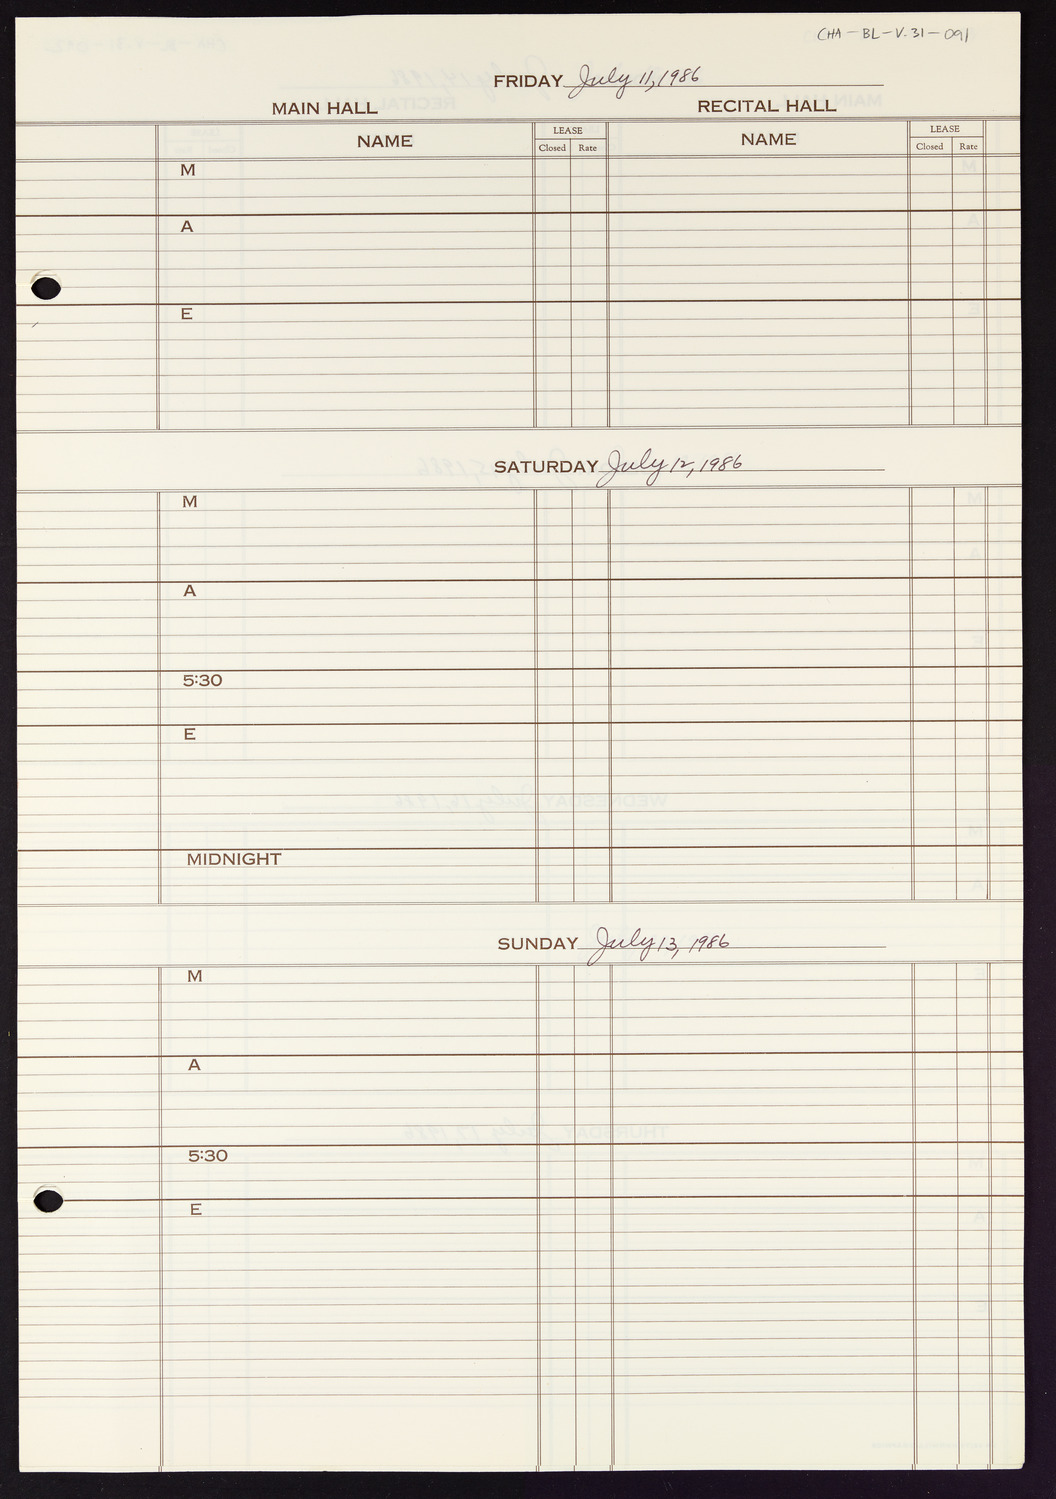 Carnegie Hall Booking Ledger, volume 31, page 91